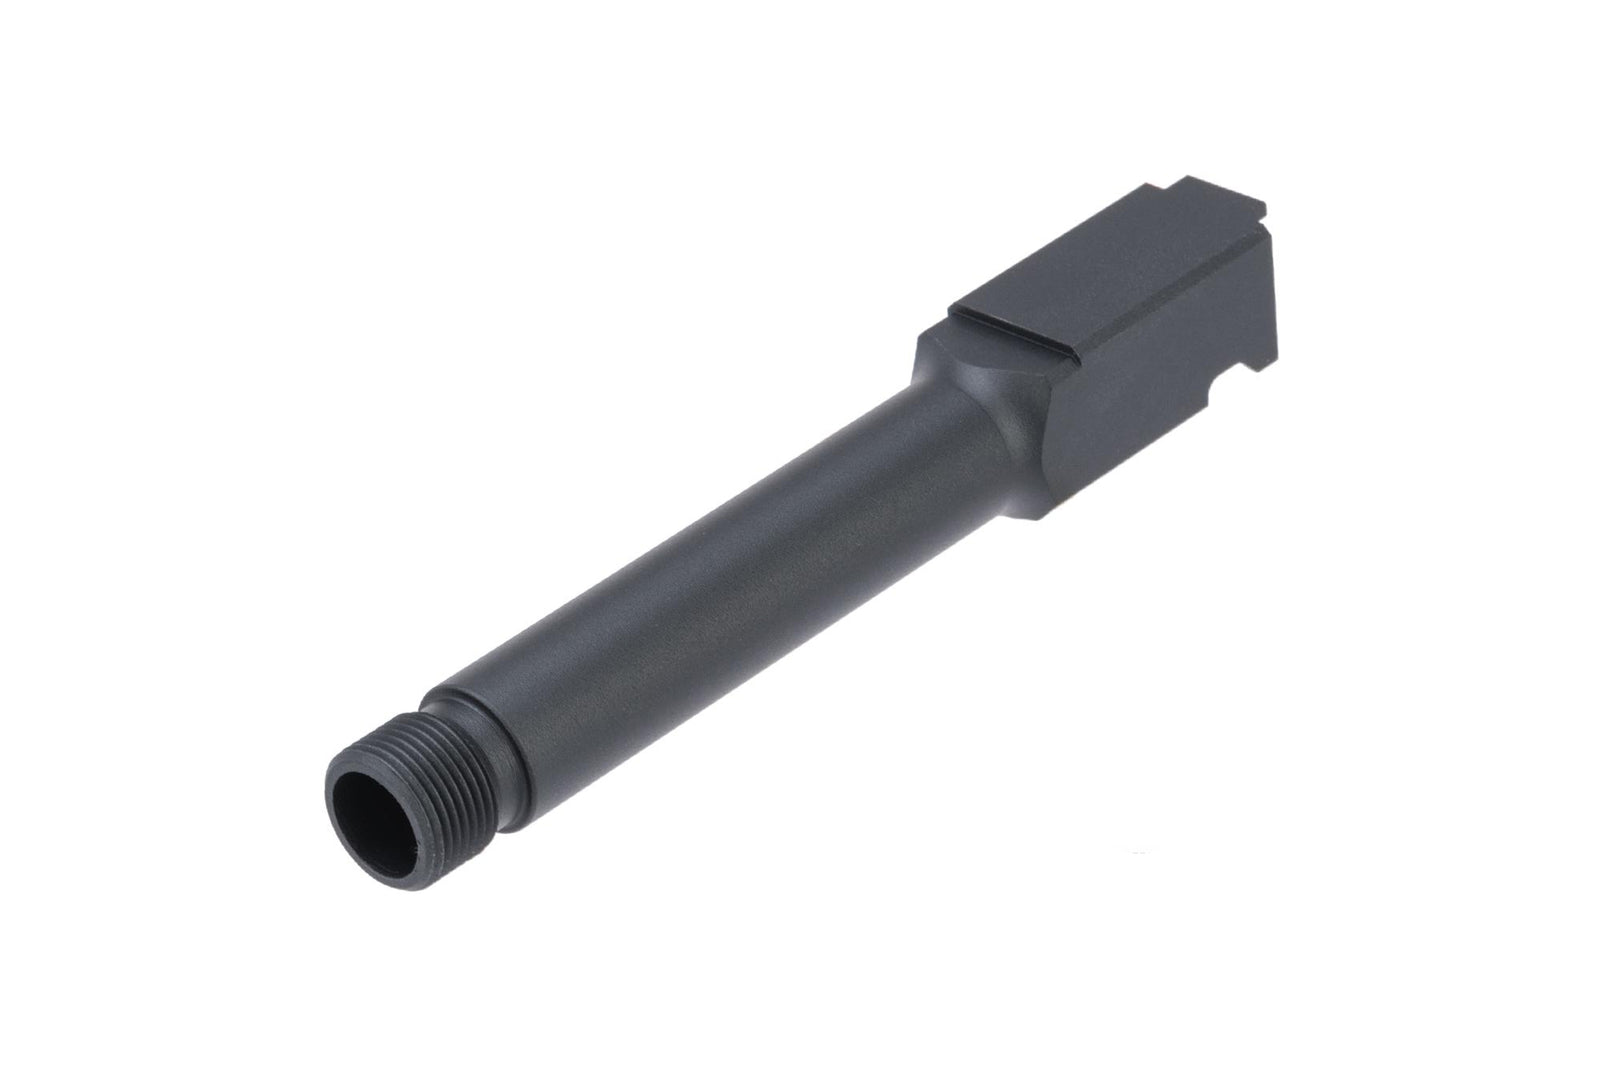 Pro-Arms CNC Aluminum Threaded Outer Barrel for Elite Force GLOCK 19 GBB Pistols